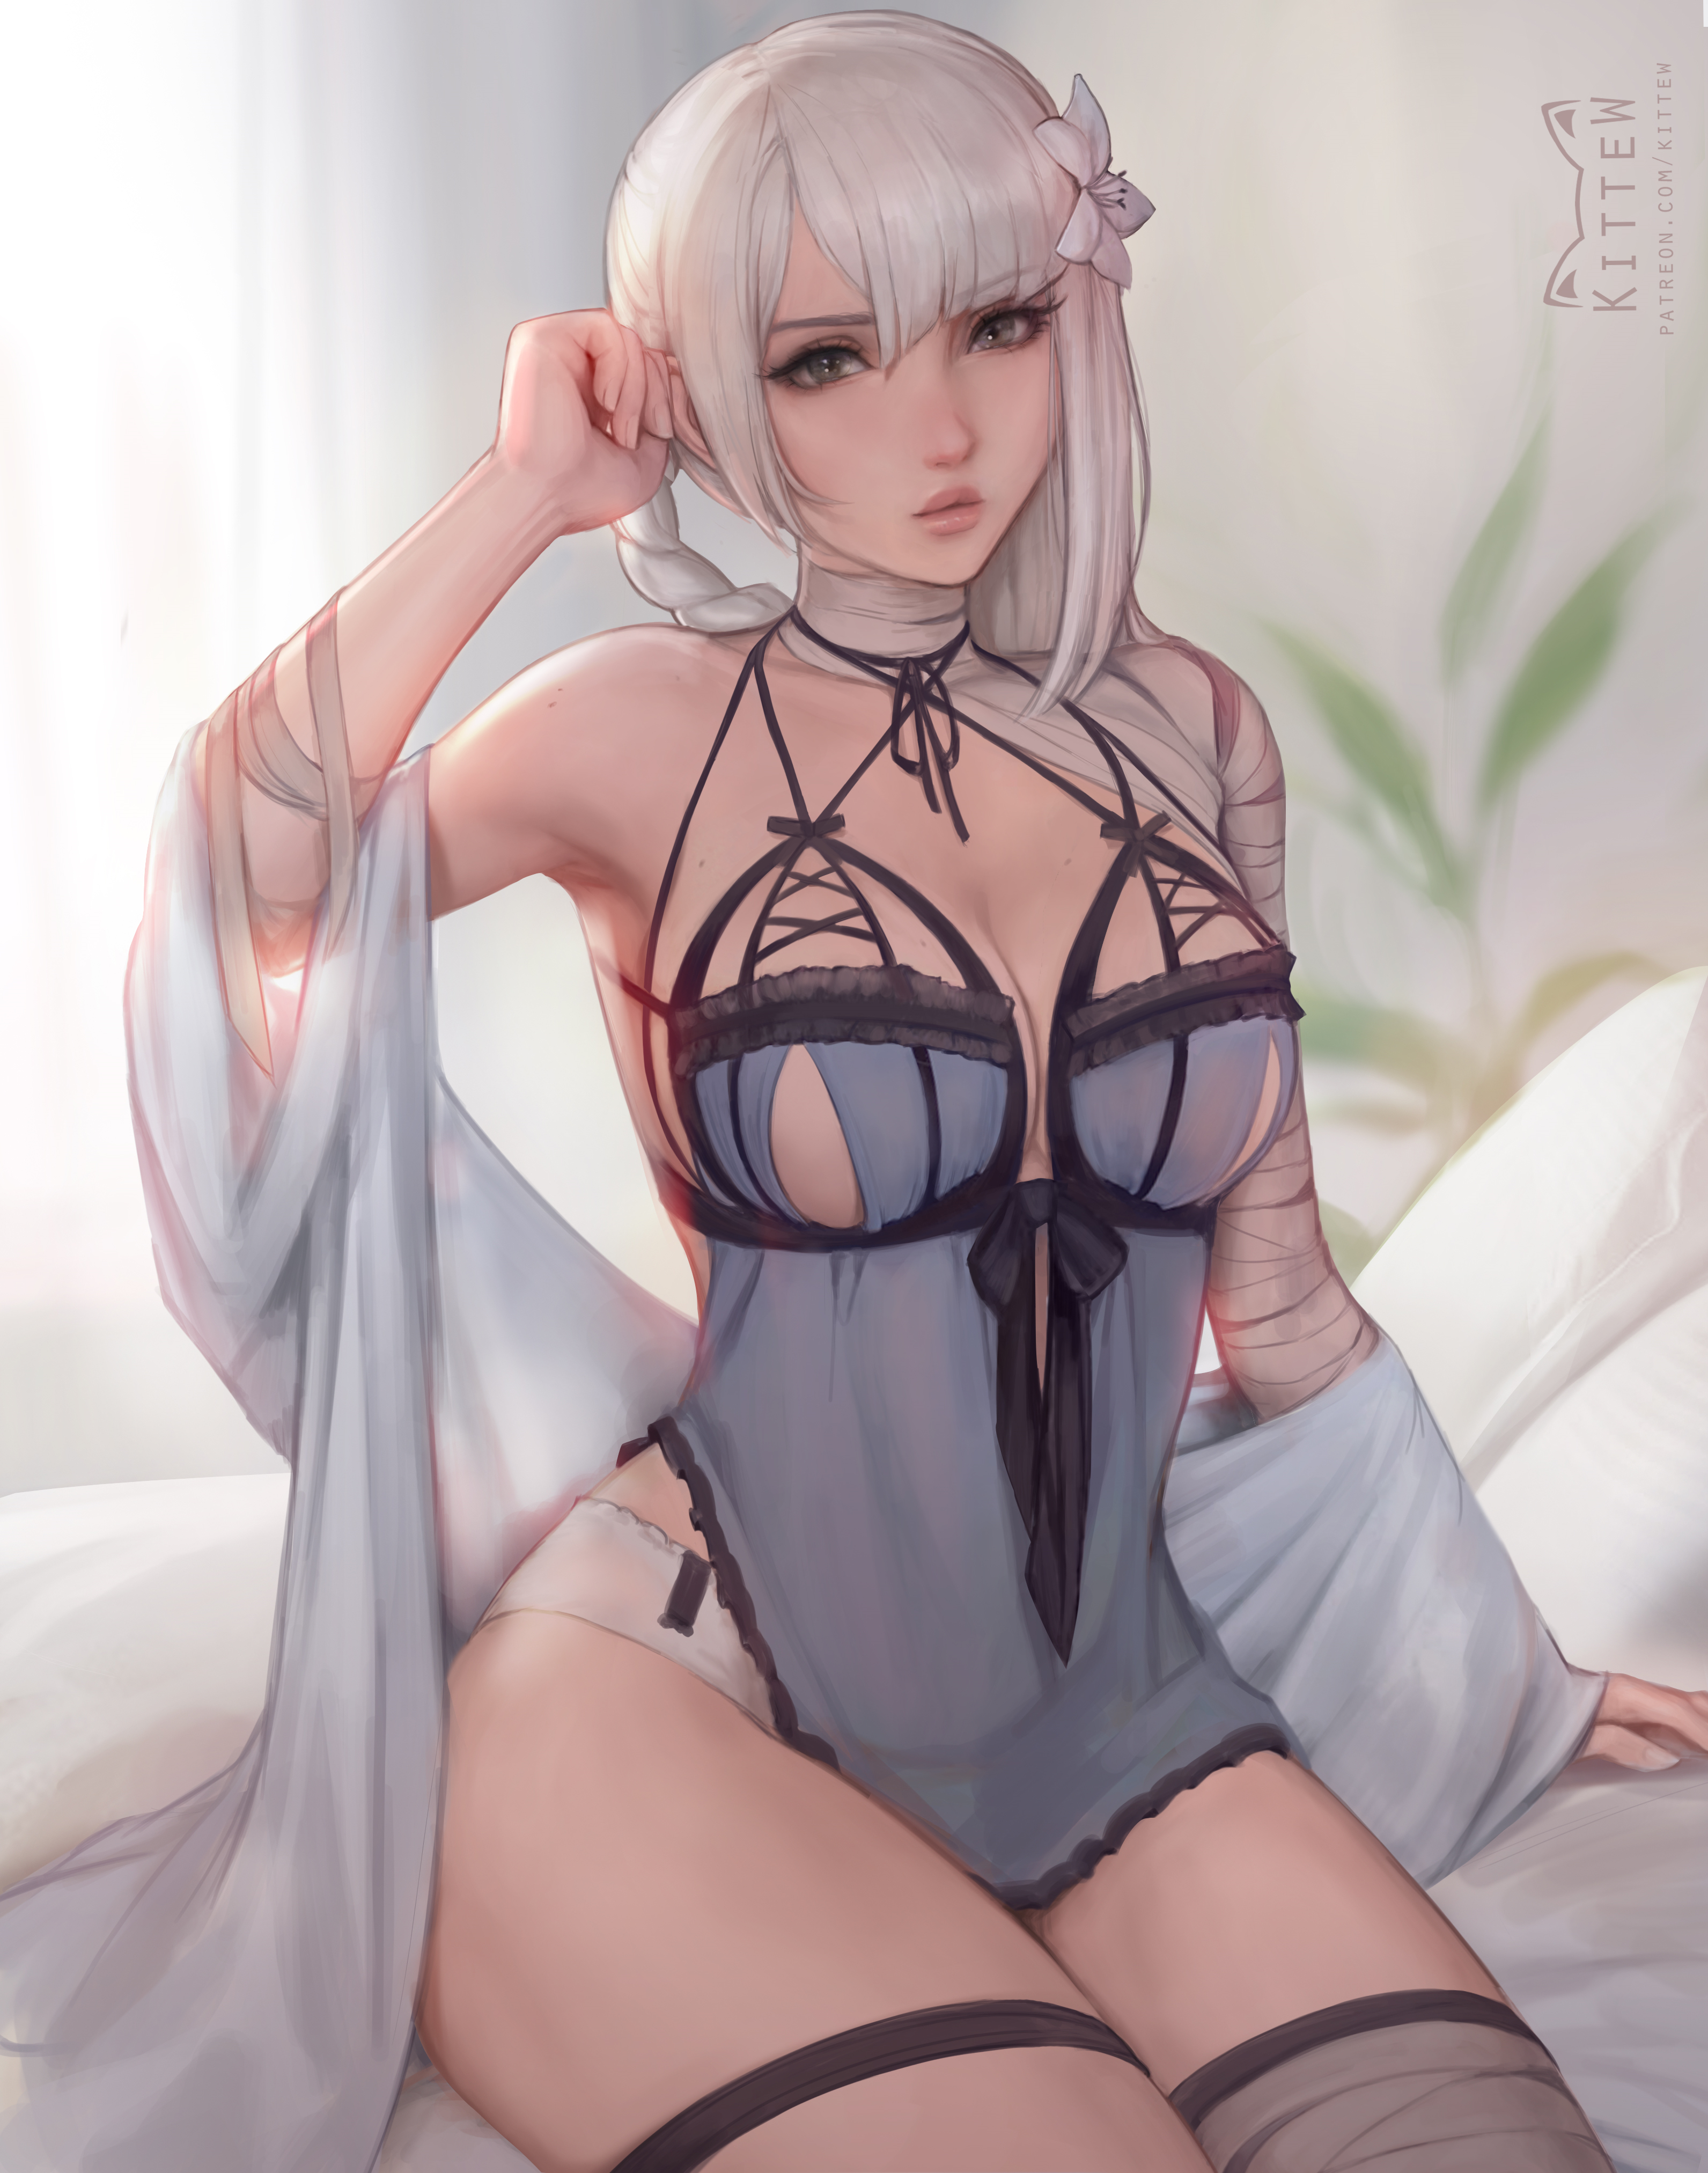 General 3184x4050 Kaine (NieR) video games video game girls white hair video game characters braids bandages cleavage babydolls underwear panties white panties looking at viewer thick thigh sitting thigh strap in bed robes 2D artwork drawing digital art illustration fan art Kittew NieR Replicant